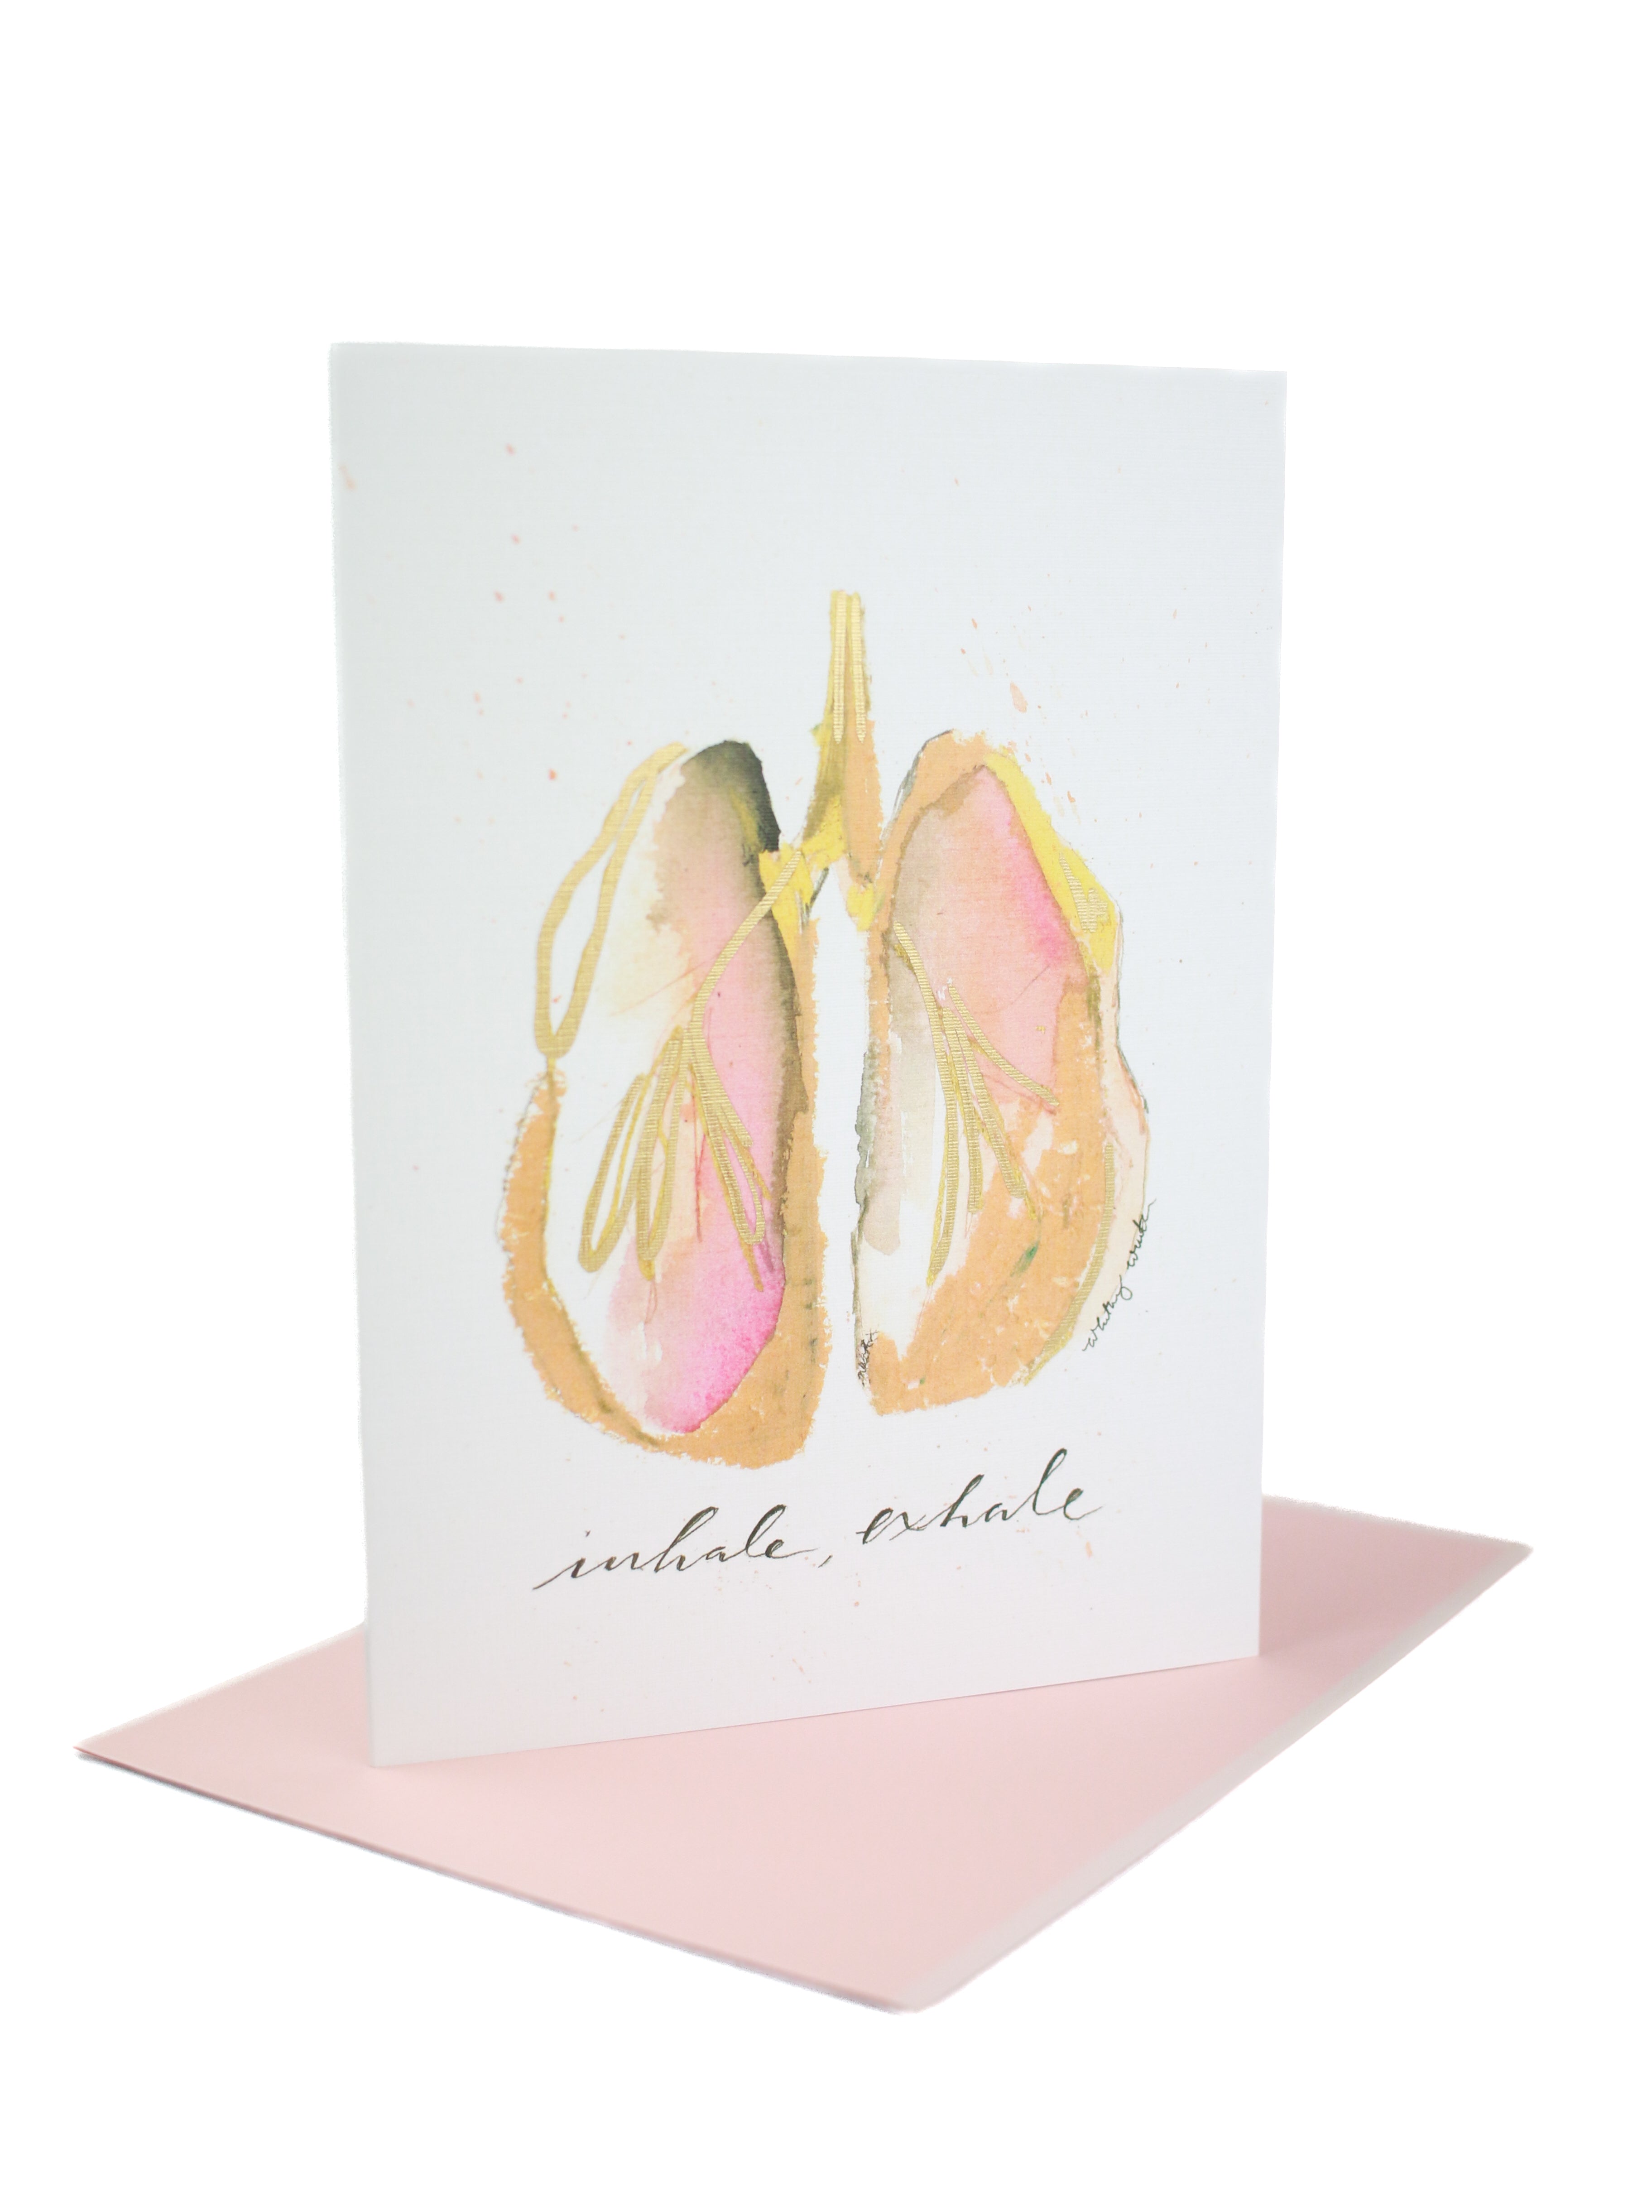 5x7 "Inhale, Exhale" Lungs Greeting Card